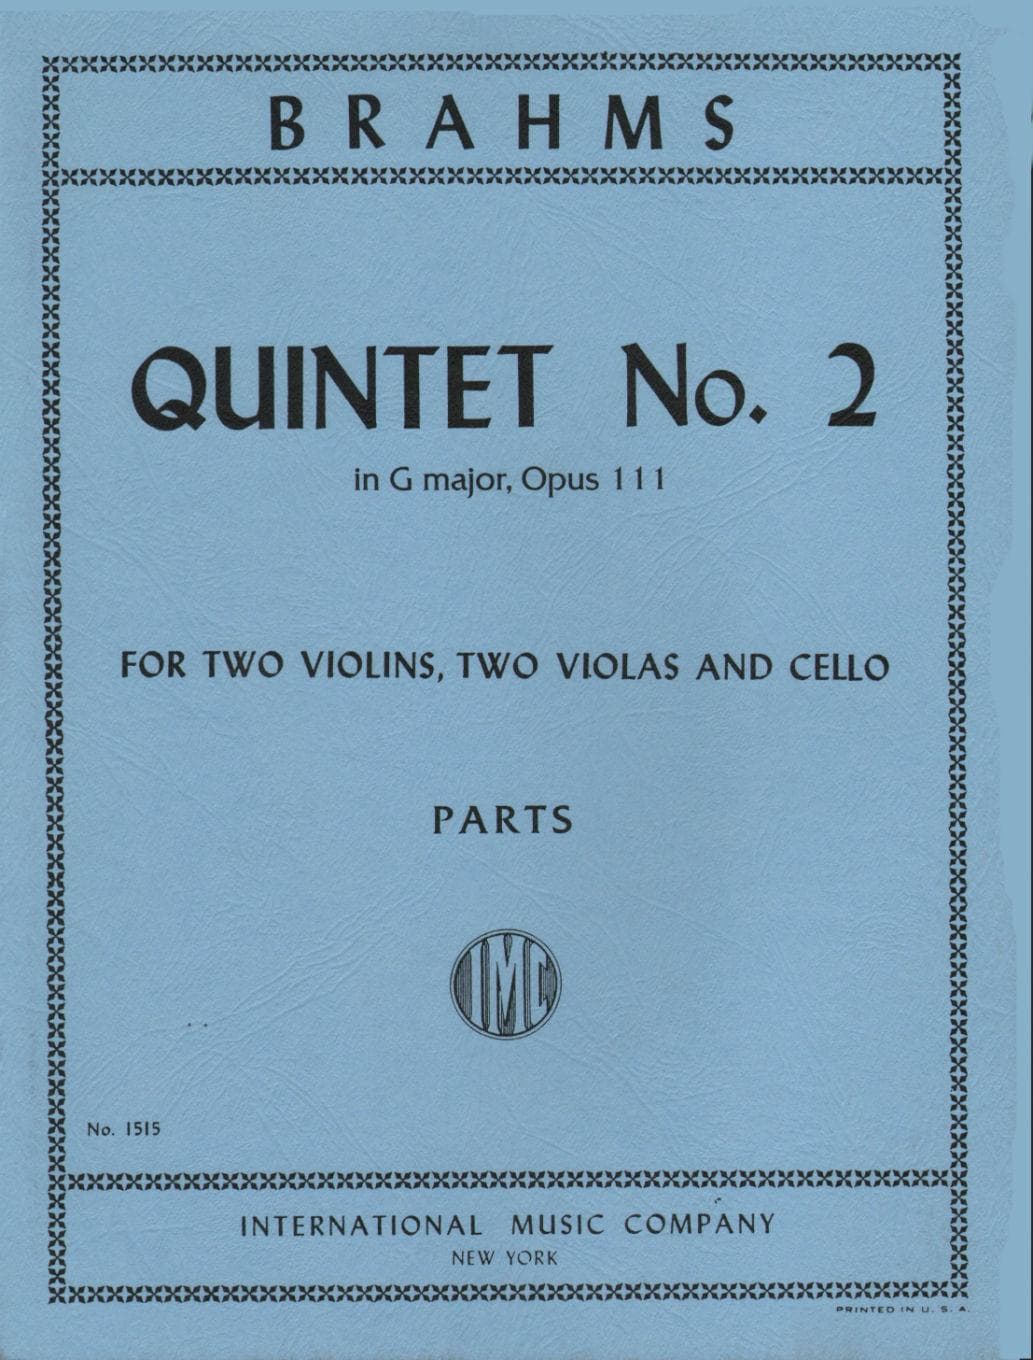 Brahms, Johannes - Quintet No 2 In G Major Op 111 for Two Violins, Two Violas and Cello - Arranged by the Gewandhaus Quartet - International Edition